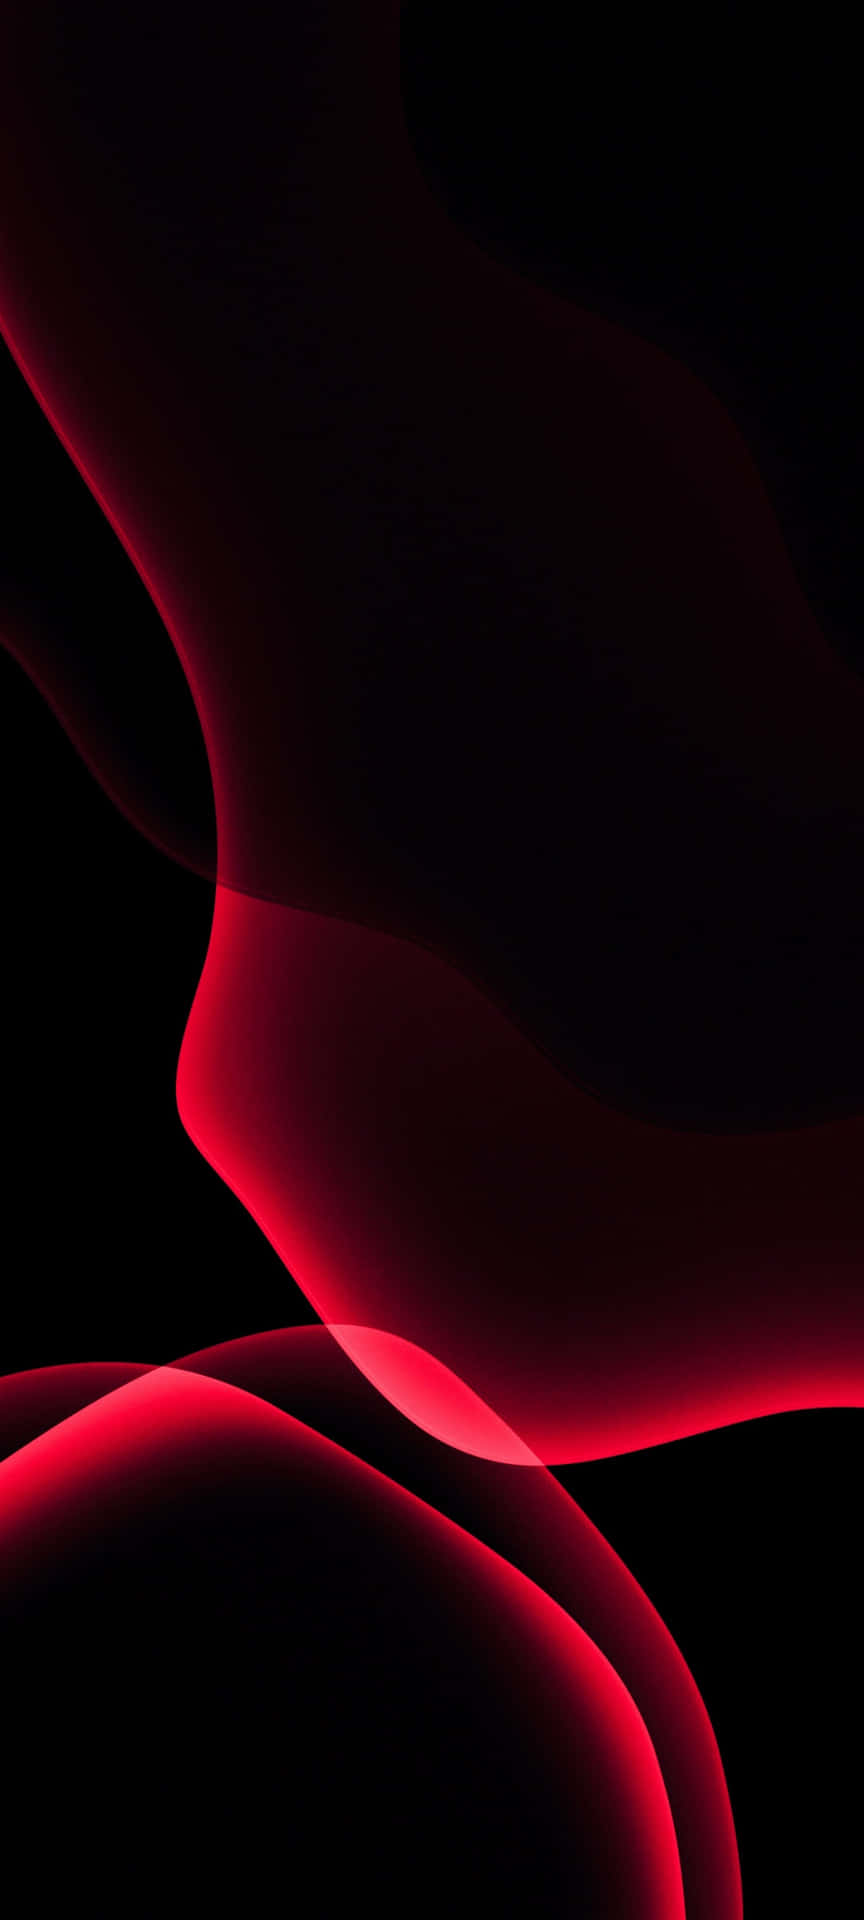 Download A Black Background With Red Light Wallpaper | Wallpapers.com